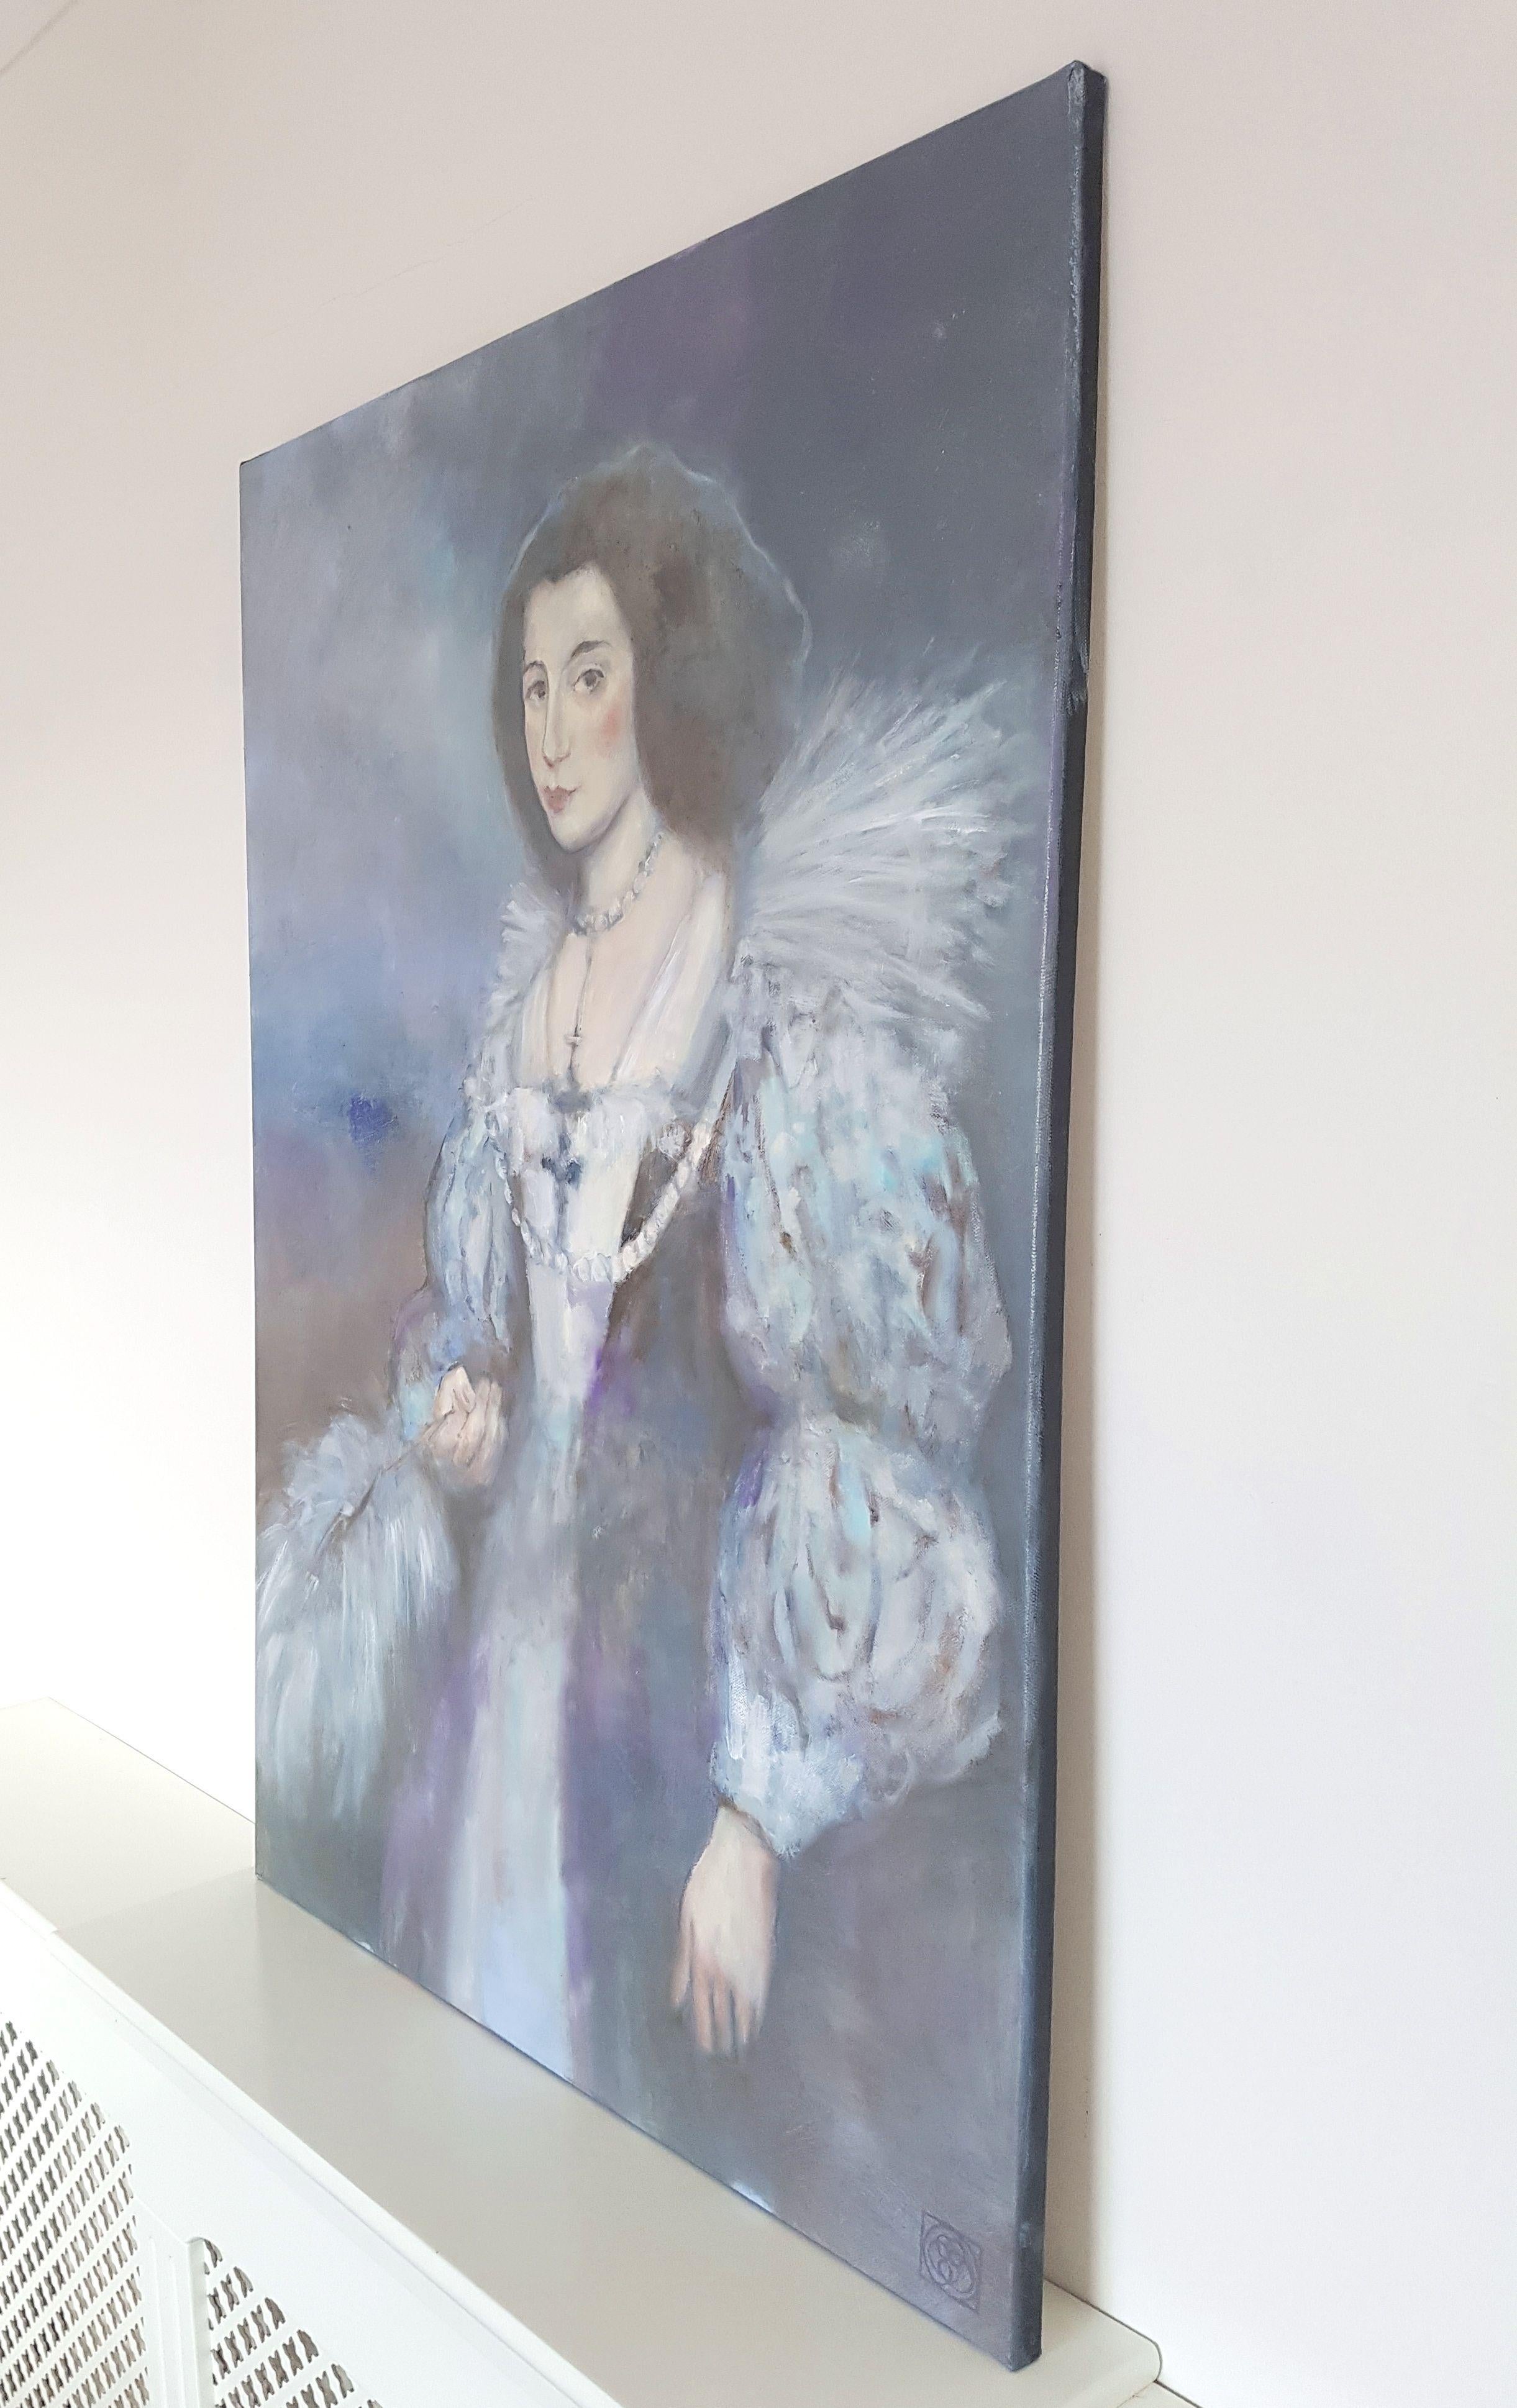 Marie-Louise (after Van Dyck), (2017)  oil on canvas  100 x 70 cm  Varnished  Can be hung without frame  The artwork is signed on the front, labelled on the back and includes a Certificate of Authenticity.  The painting is packed in bubble wrap and